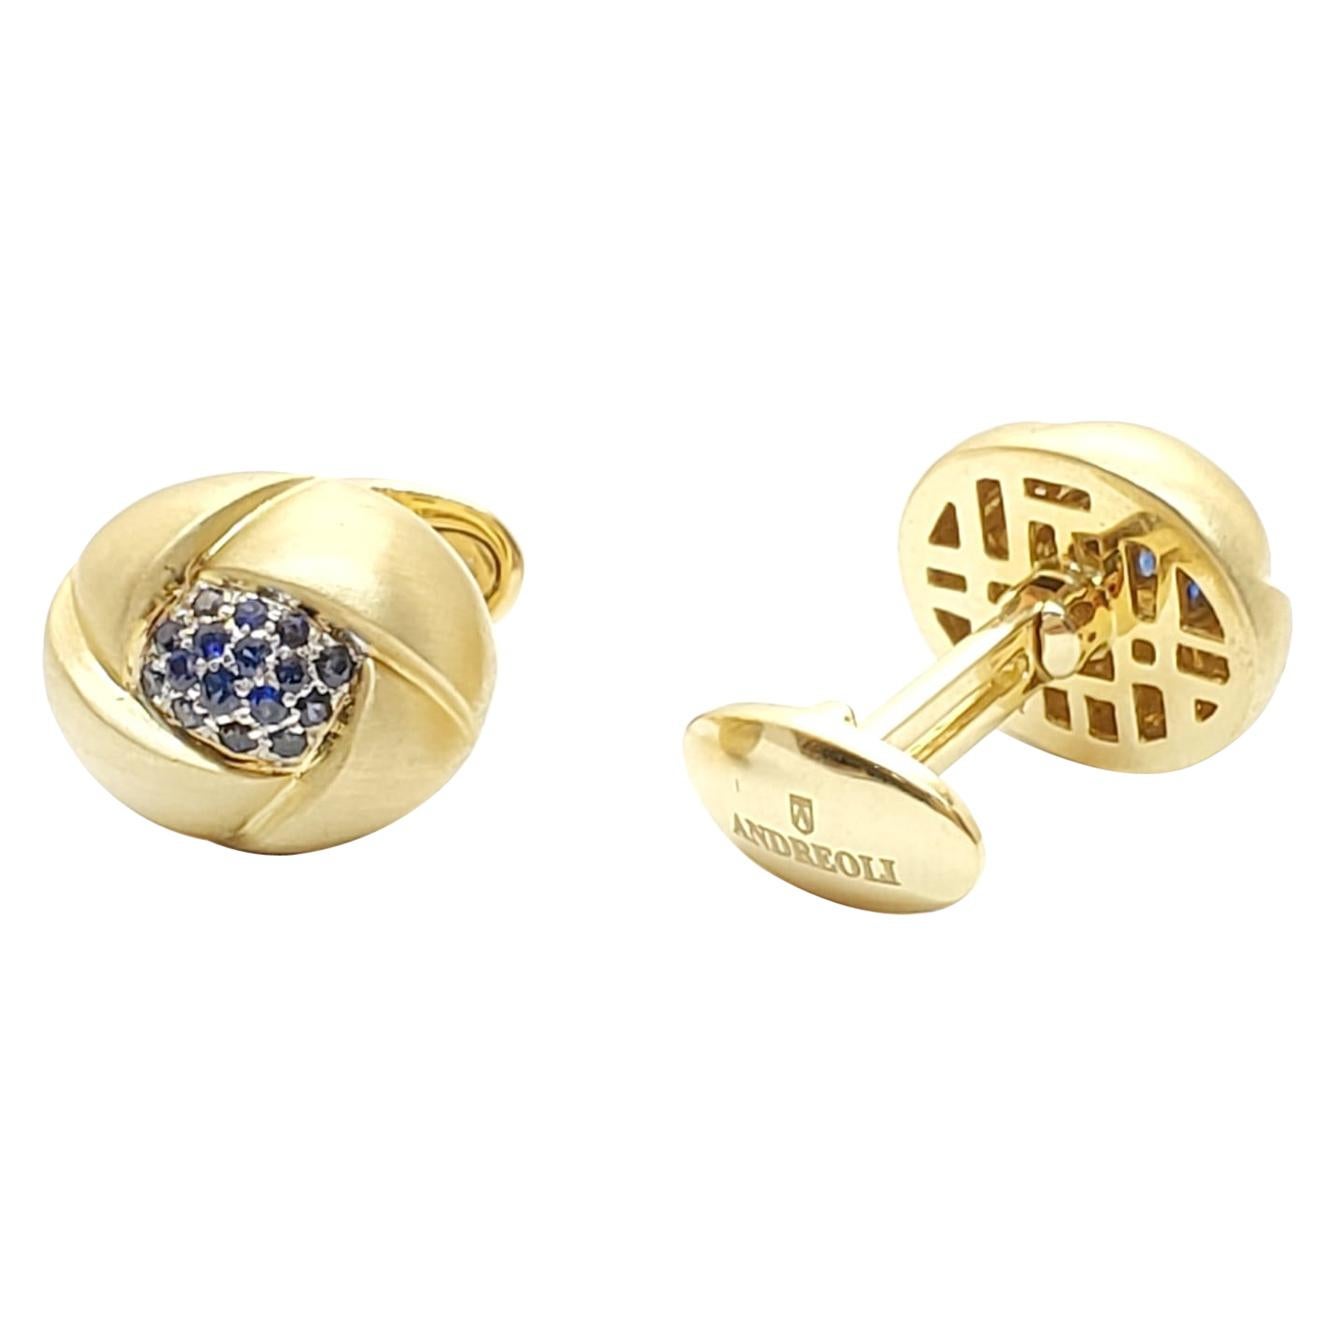 Andreoli 18k Gold Yellow Brushed Gold and Blue Sapphire Cufflinks For Sale